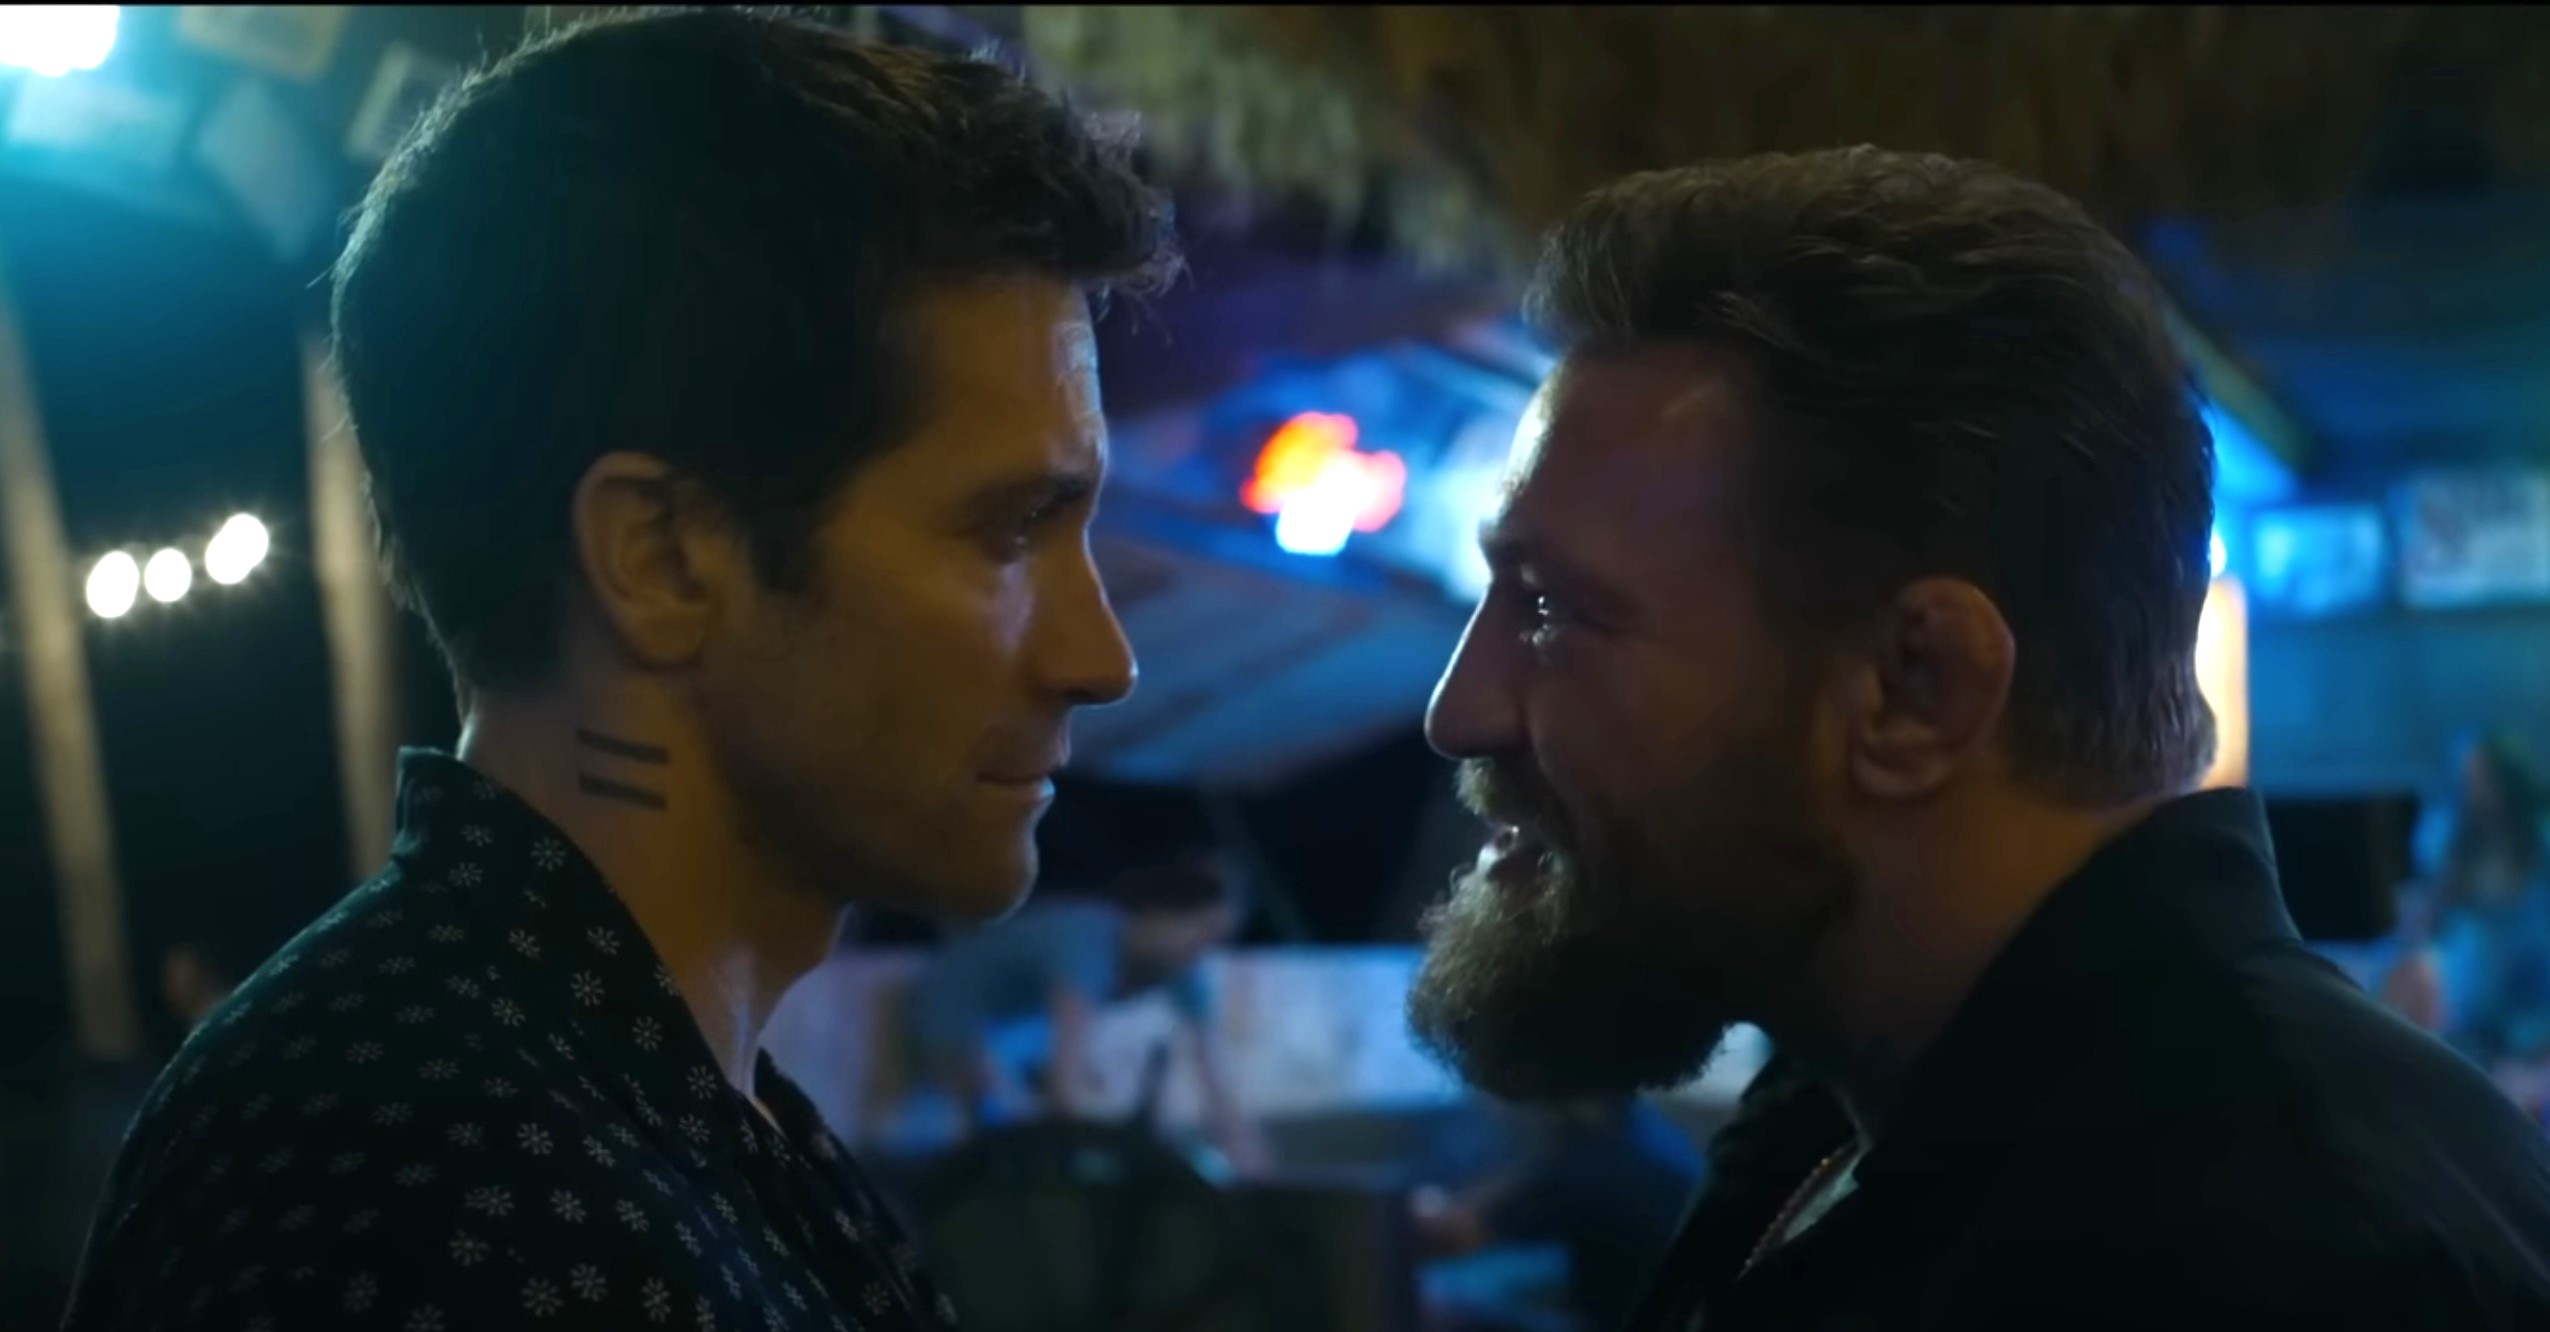 'Road House' Trailer Jake Gyllenhaal and Conor McGregor Face Off In